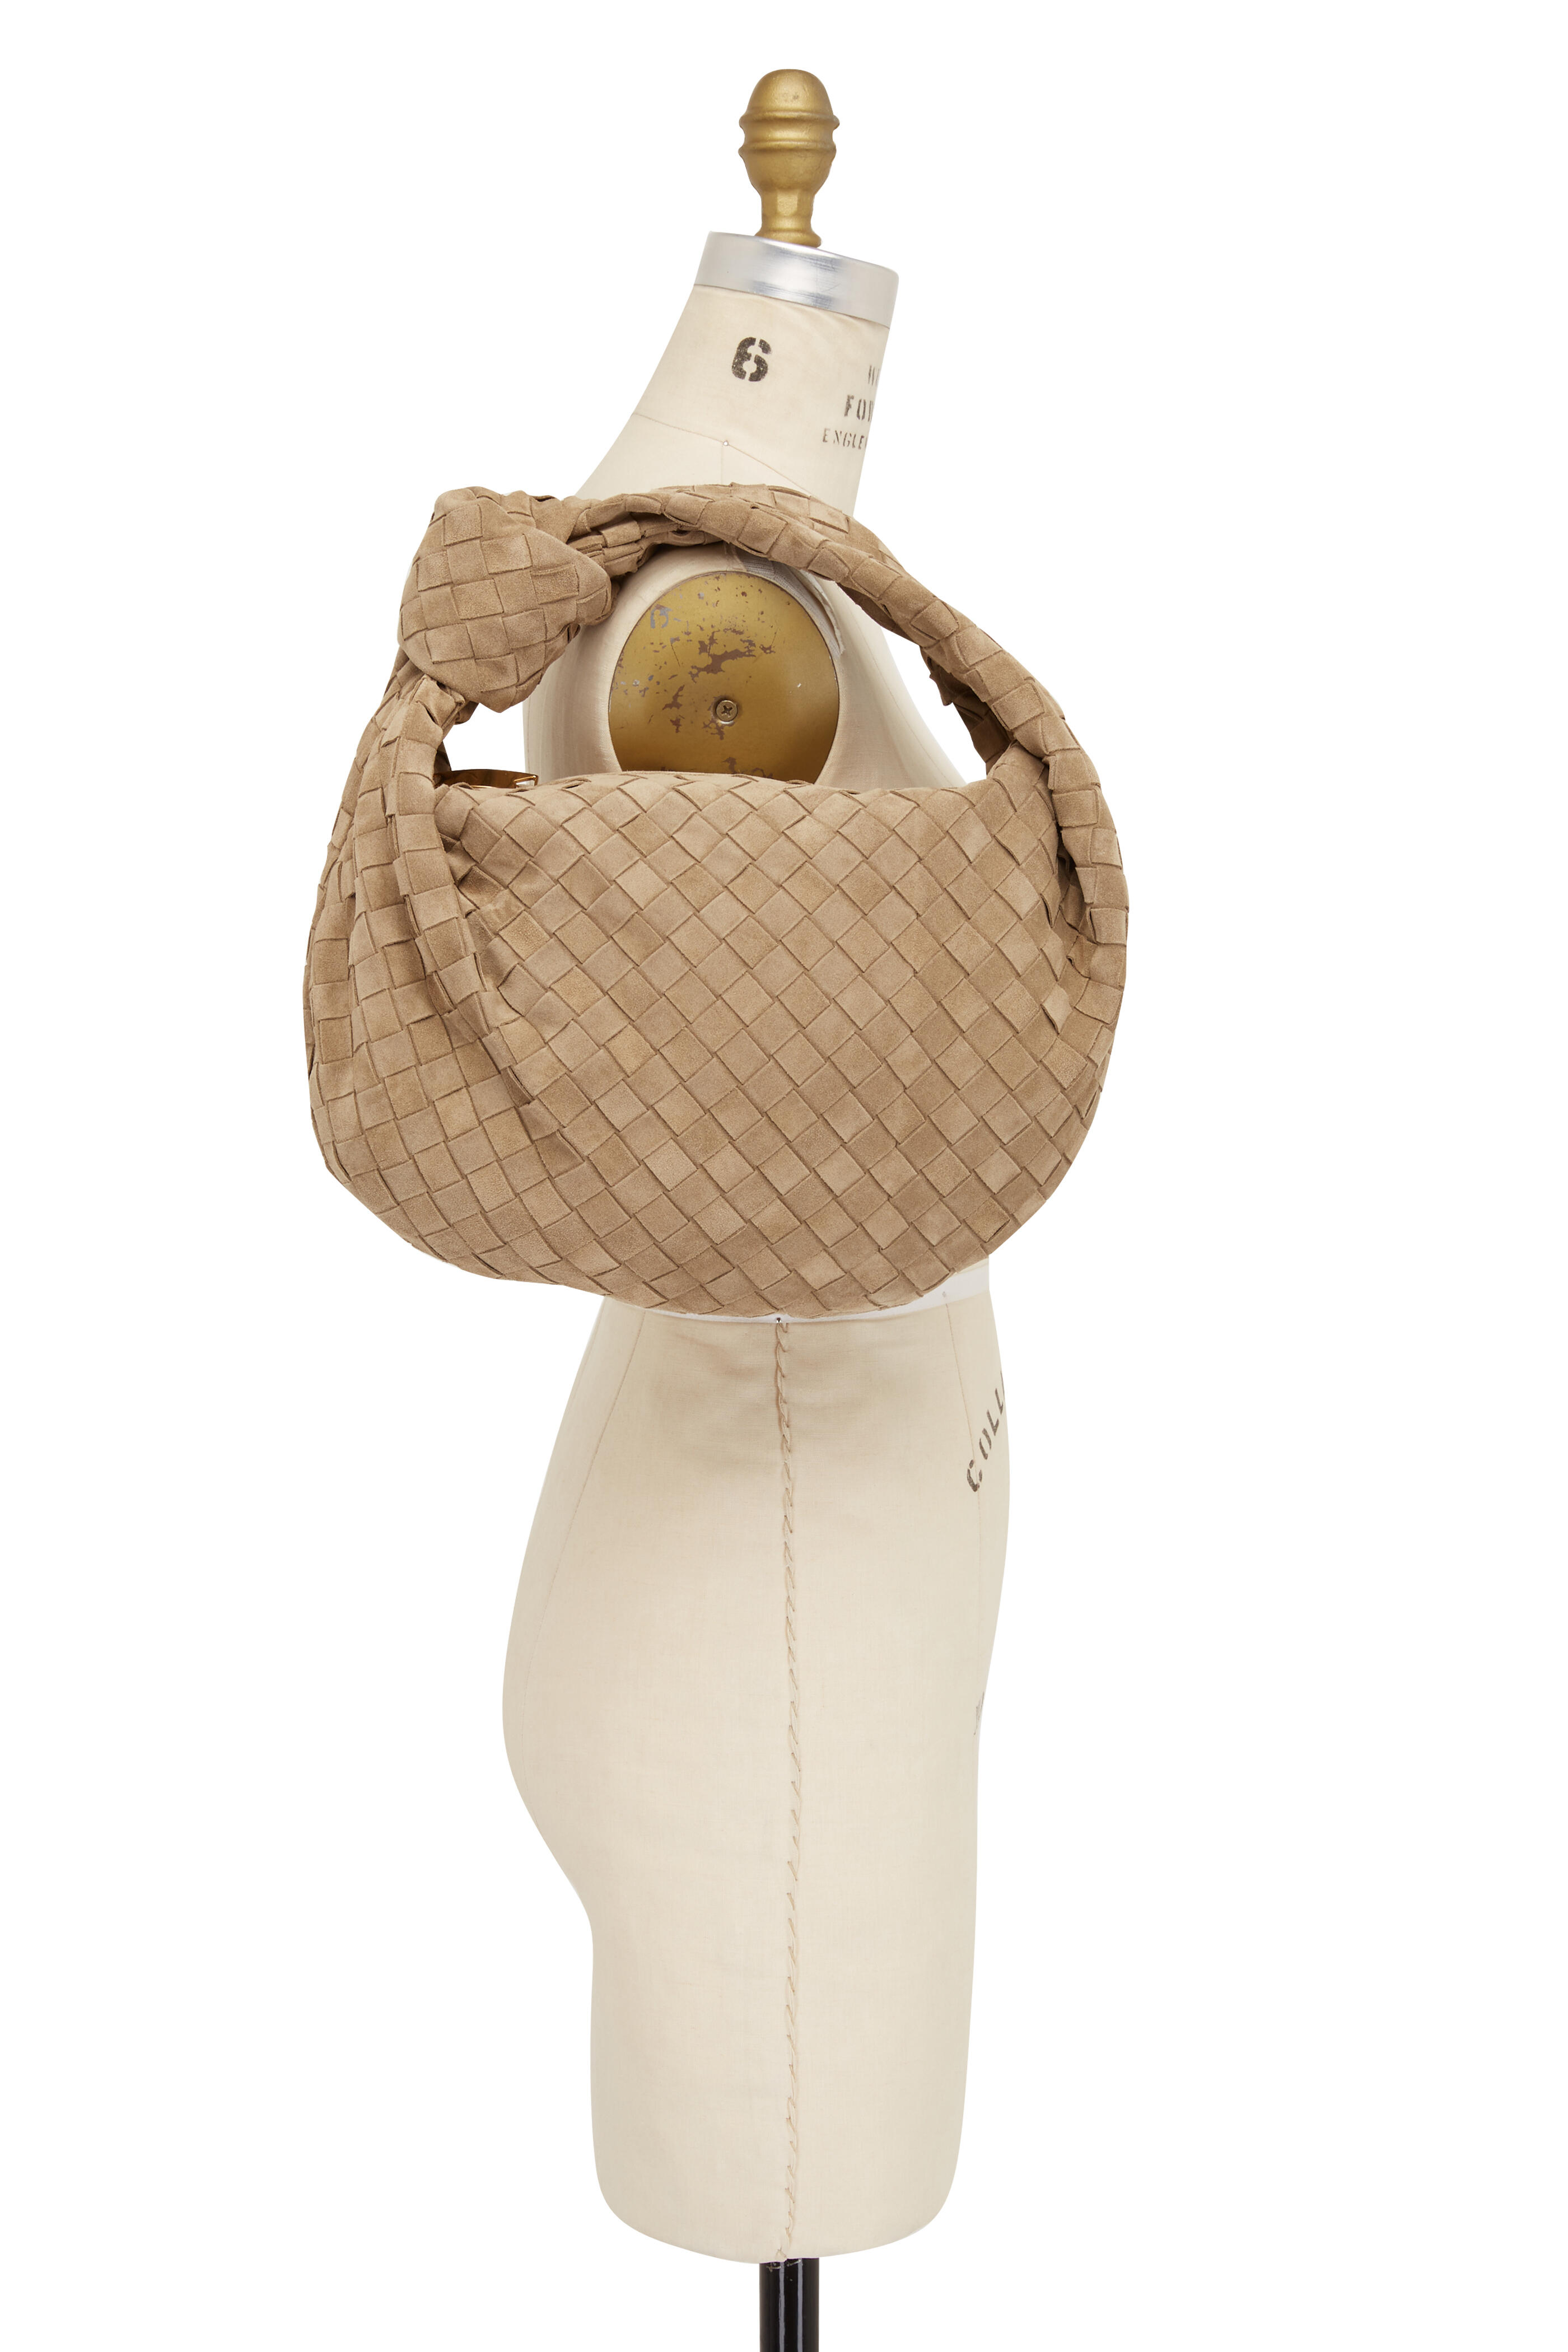 Jodie Teen knotted intrecciato suede tote